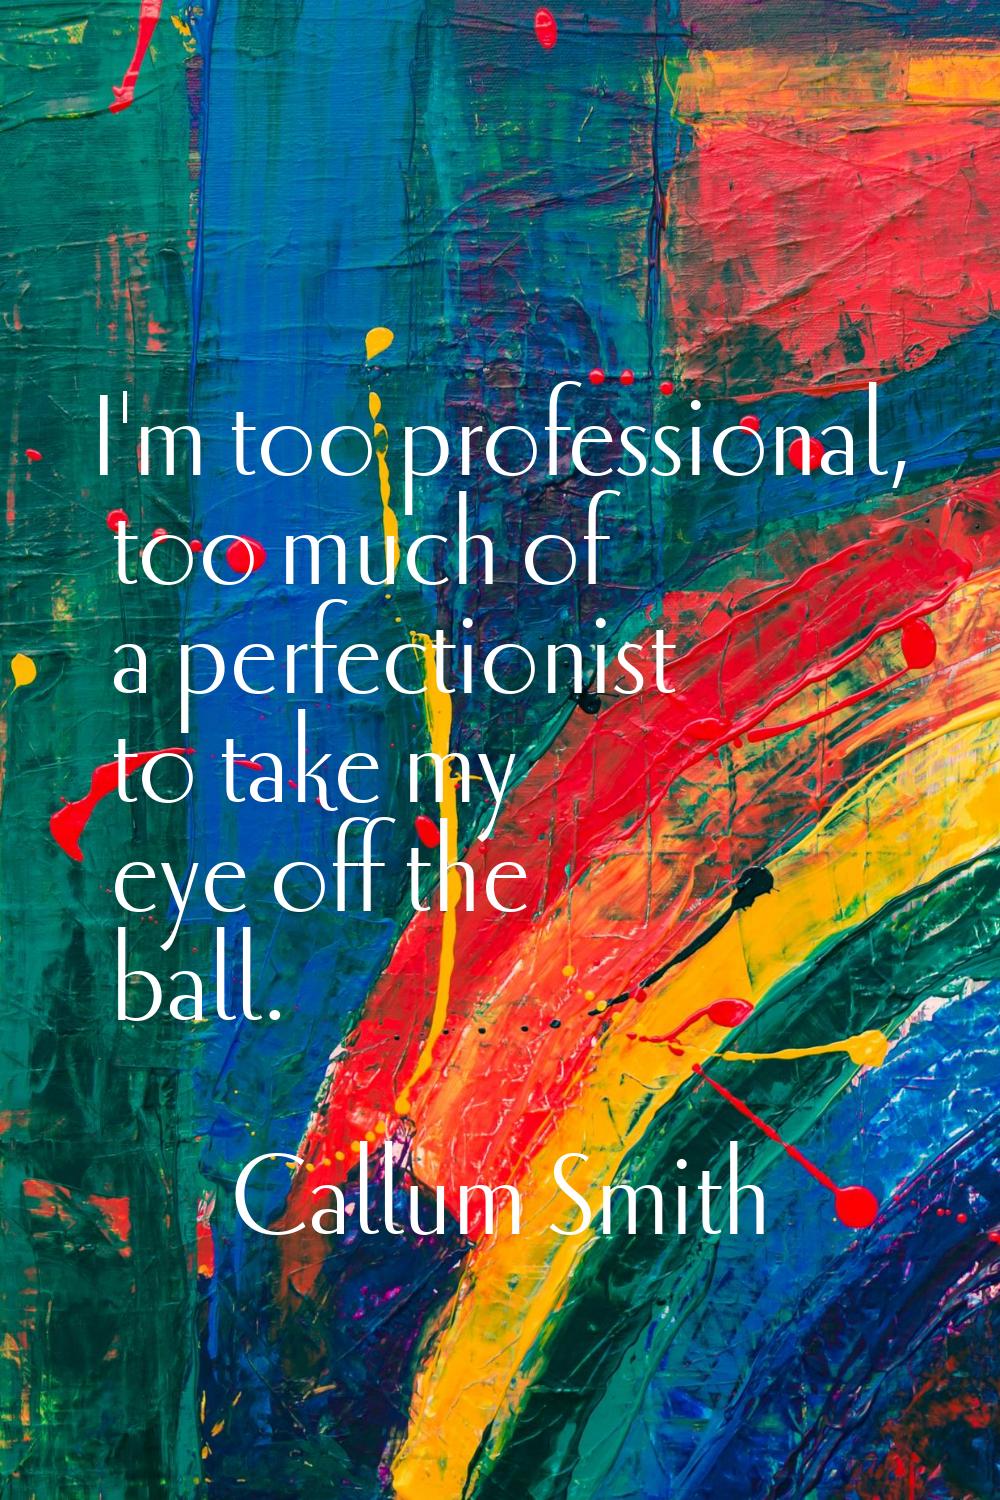 I'm too professional, too much of a perfectionist to take my eye off the ball.